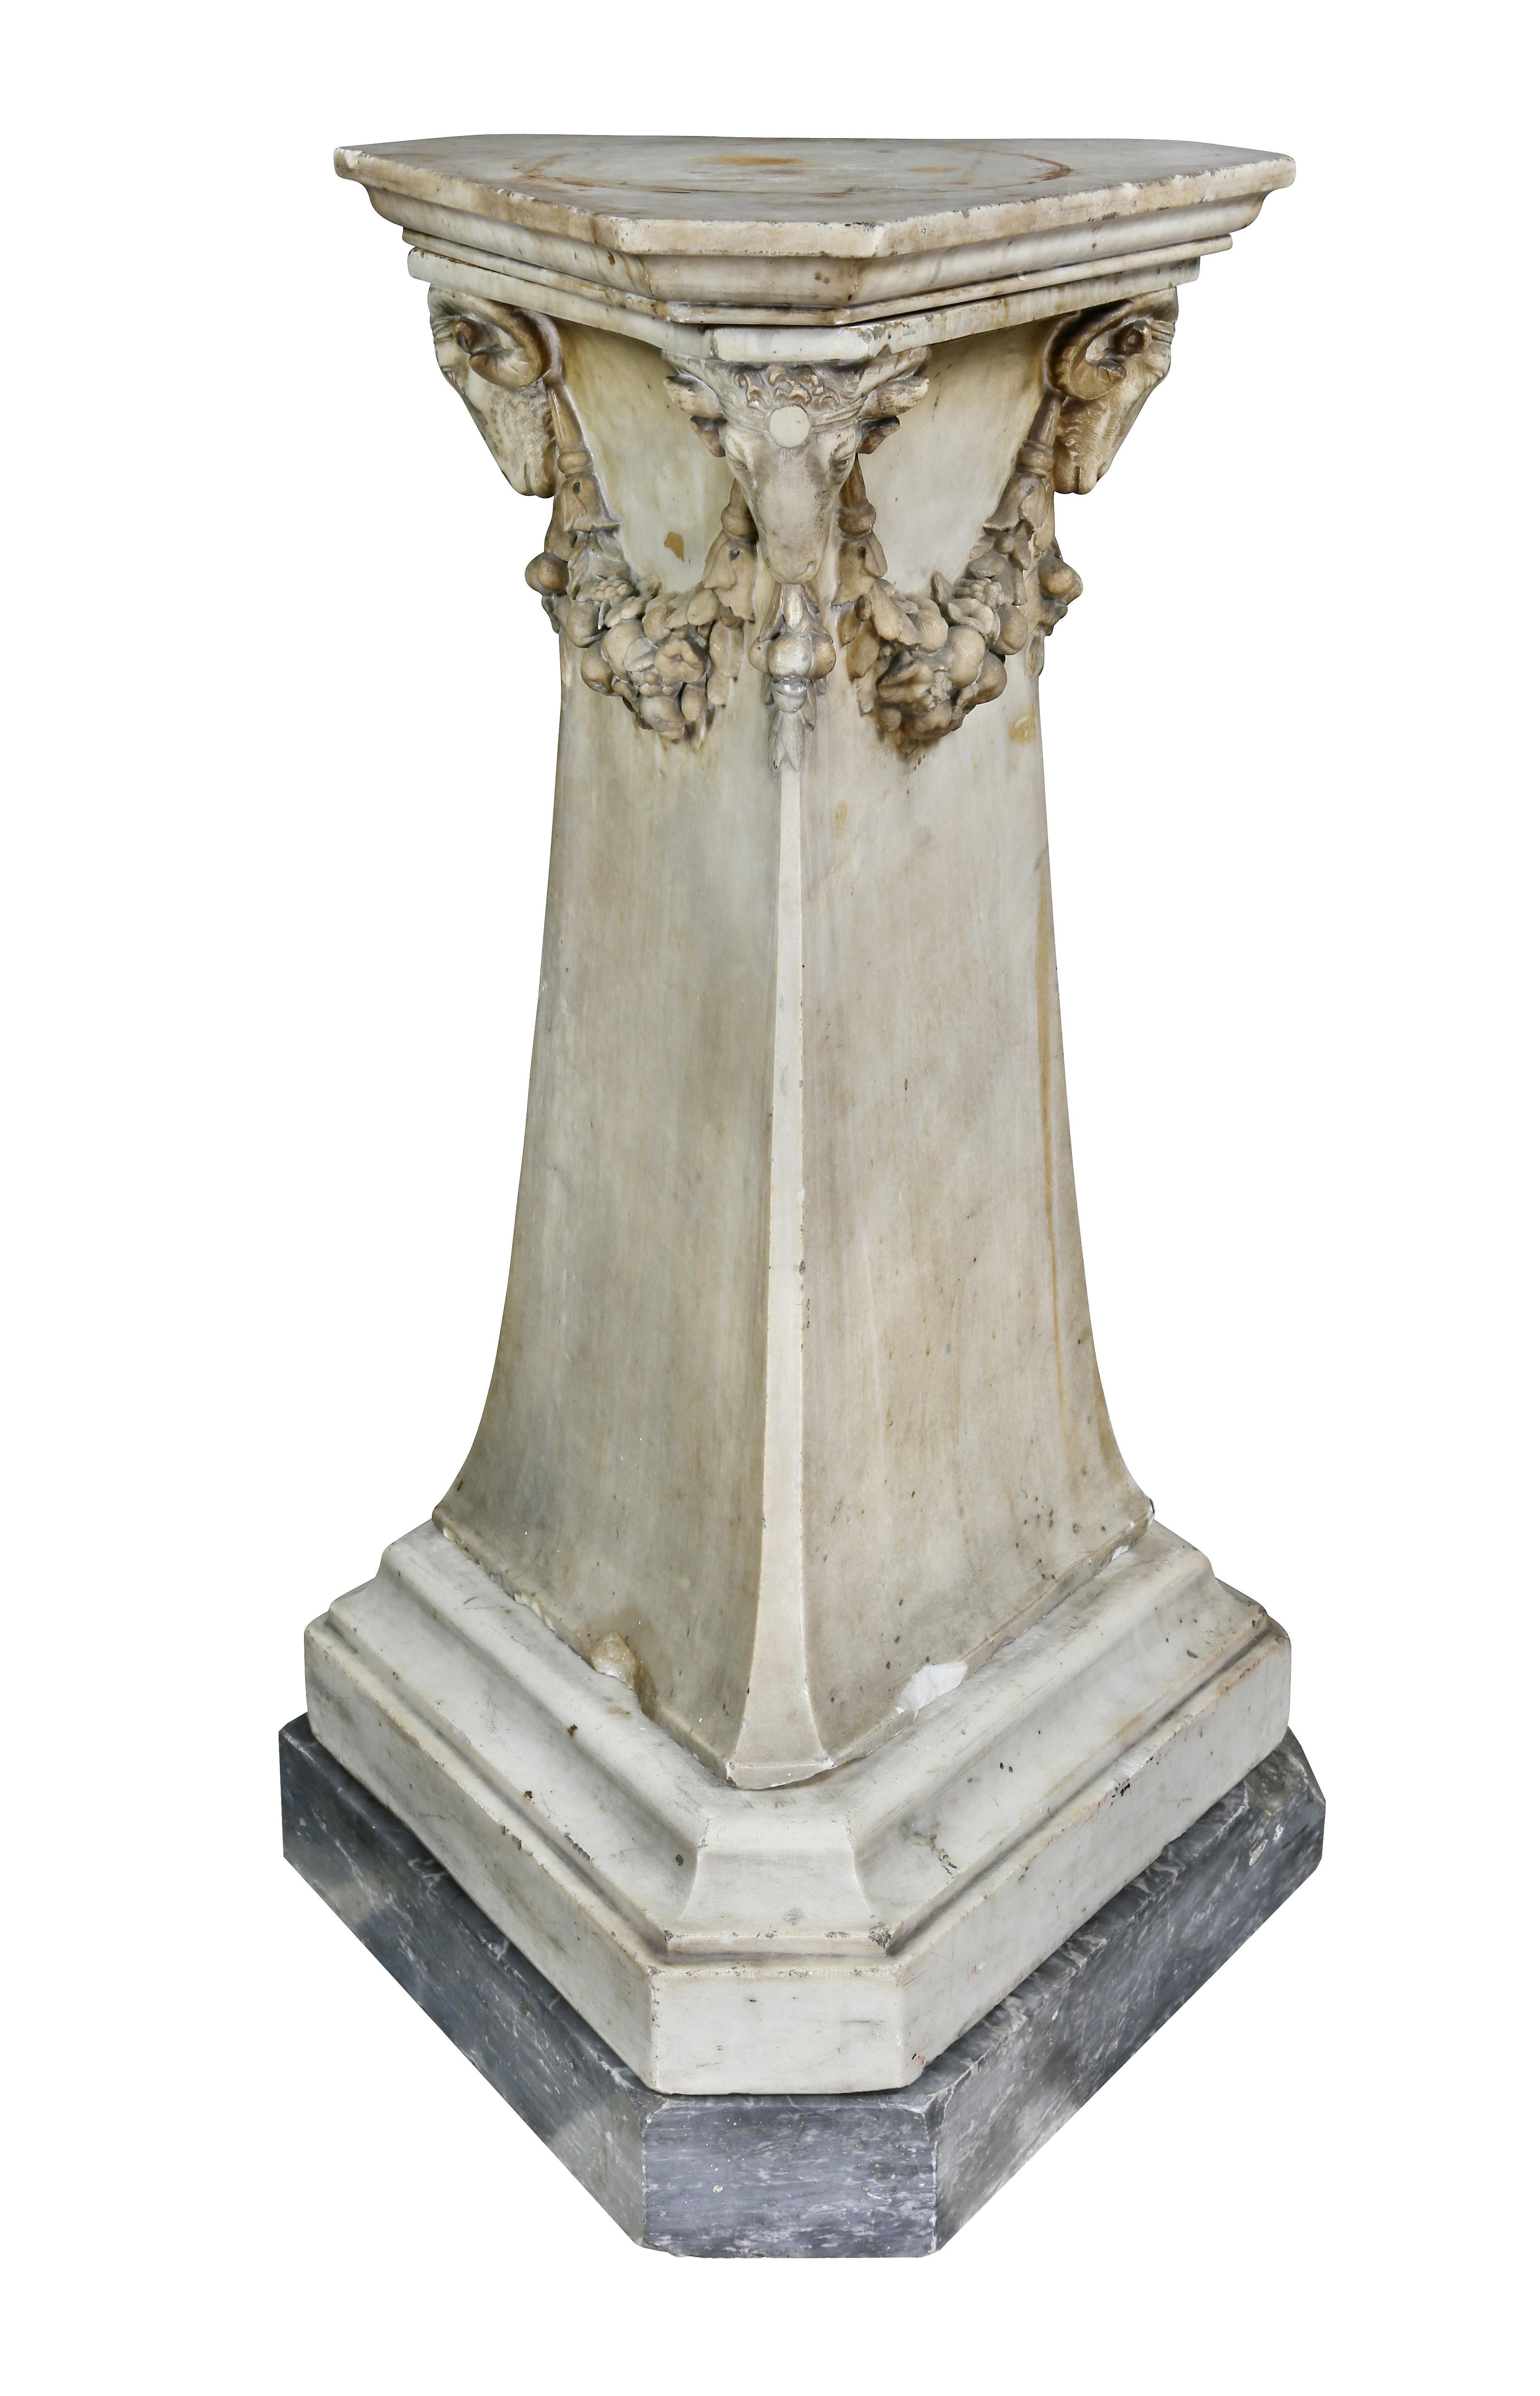 Triangular form with three carved rams heads and festoon swags, flared base and gray marble plinth. Sold Christie's East, 1983. Ex collection William Hodgins, Boston.